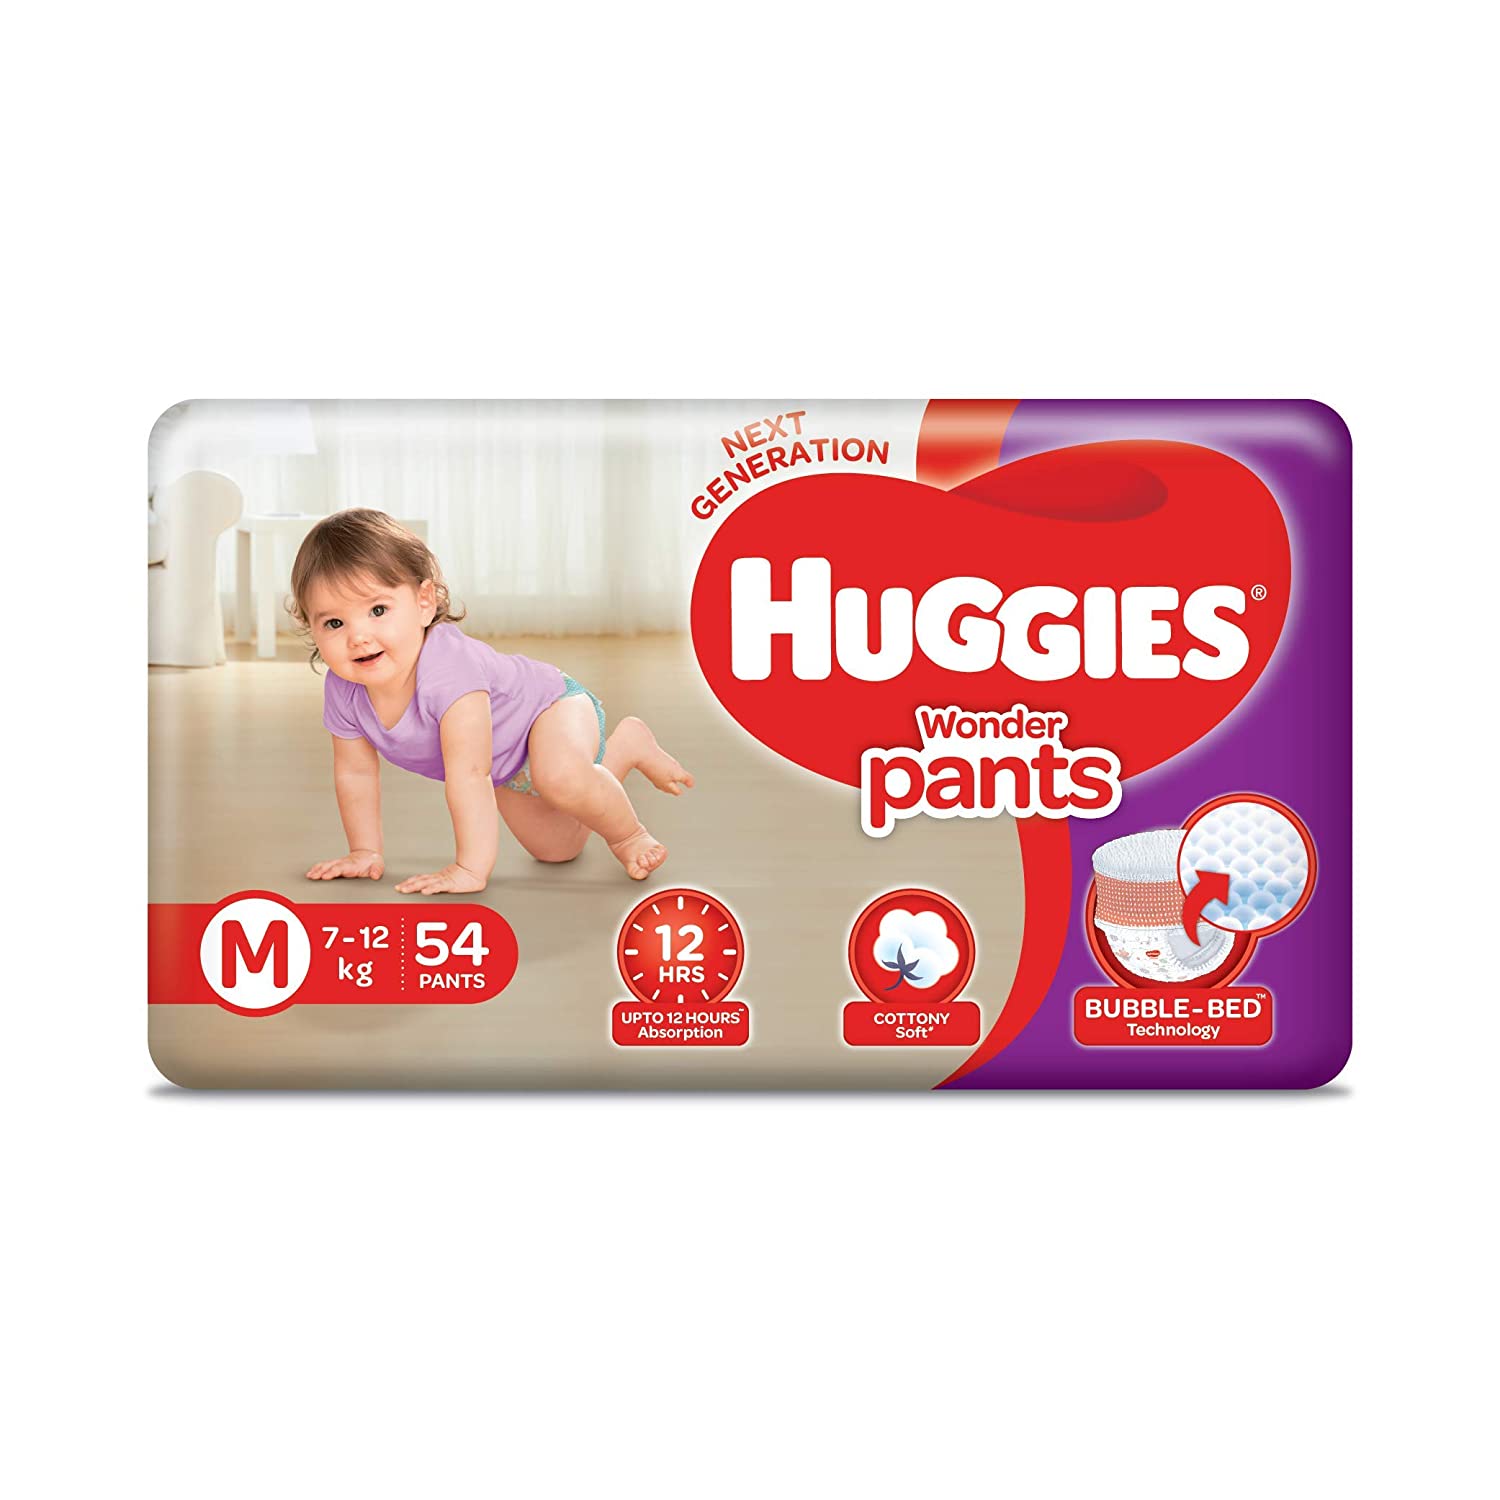 Huggies Wonder Pants Medium (M) Size Diaper Pants, 54 count, with Bubble Bed Technology for comfort